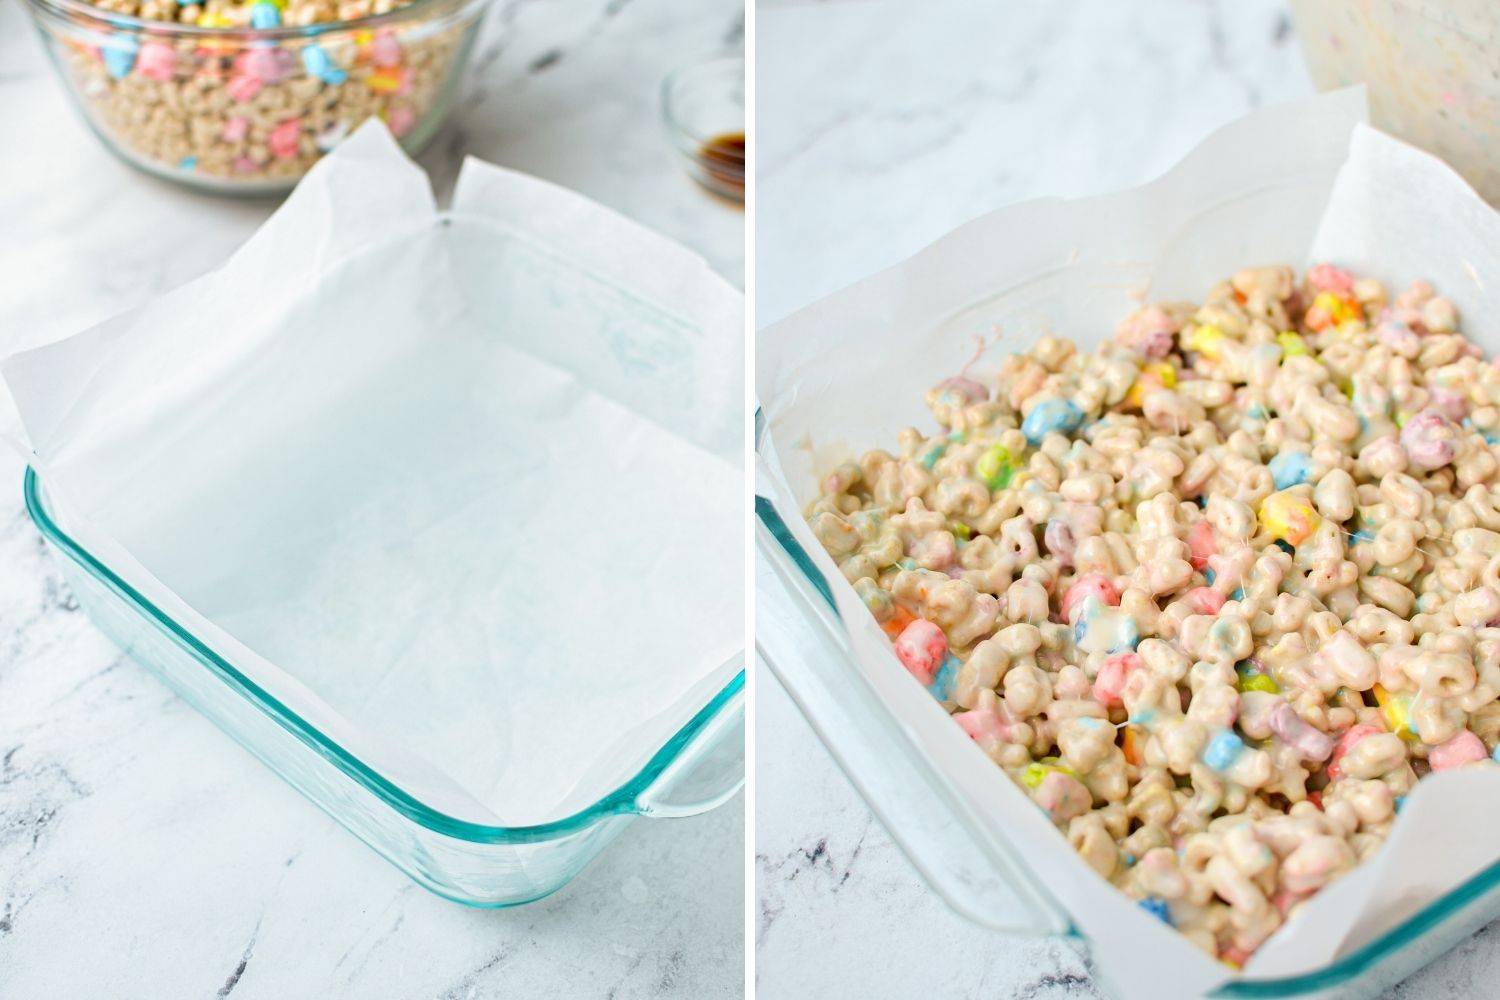 Lining a baking dish to prepare for filling with Lucky Charms treat batter.